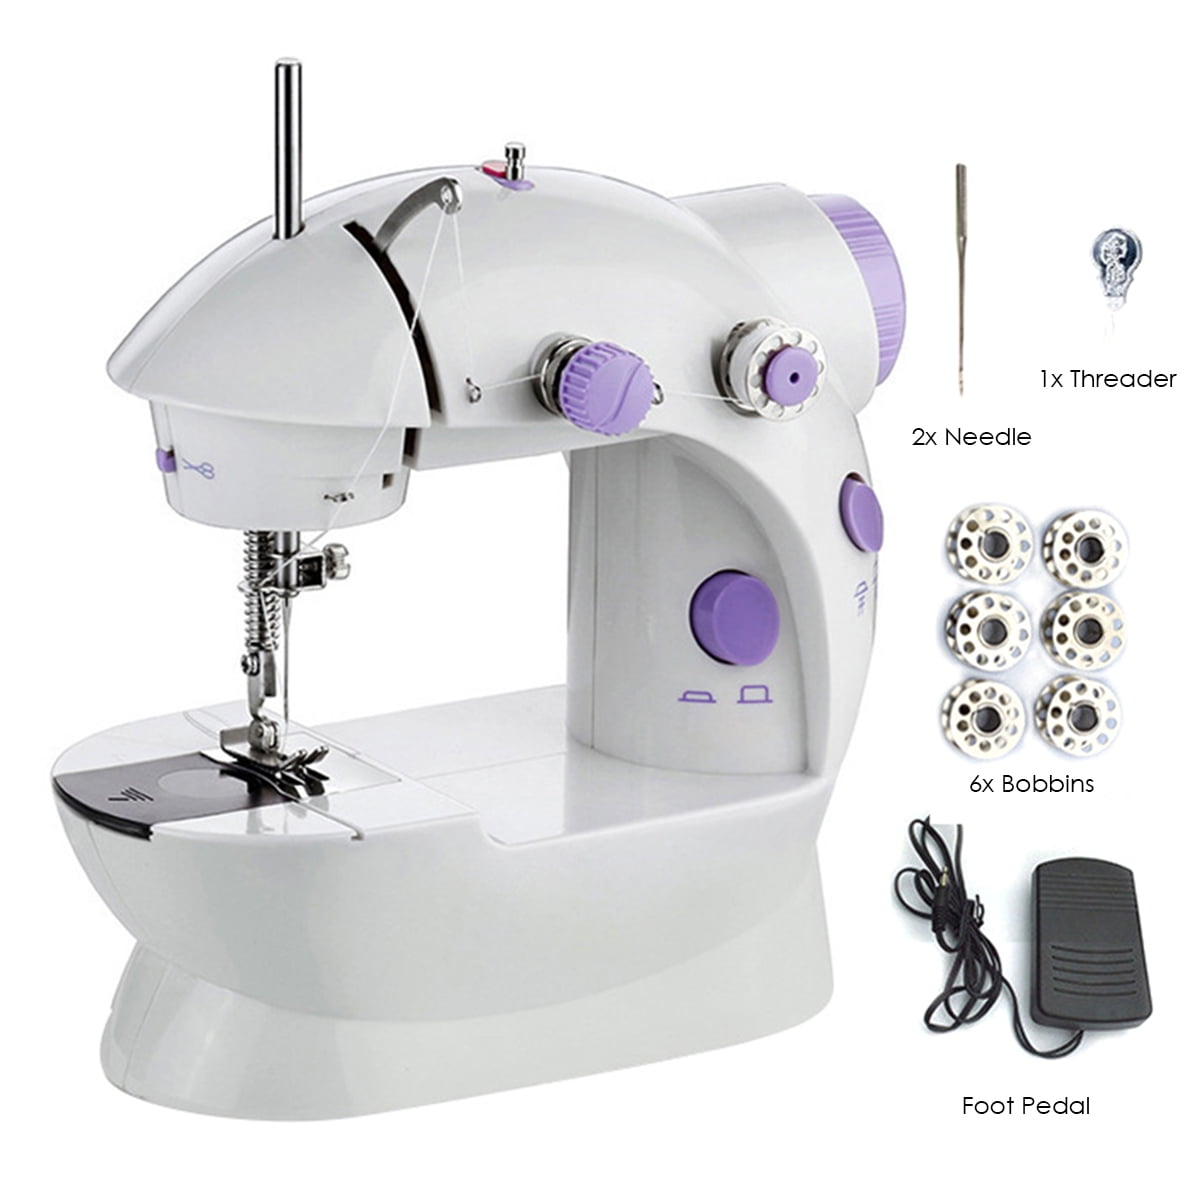 Multifunctional non-electric hand-held Mini practical sewing machine 